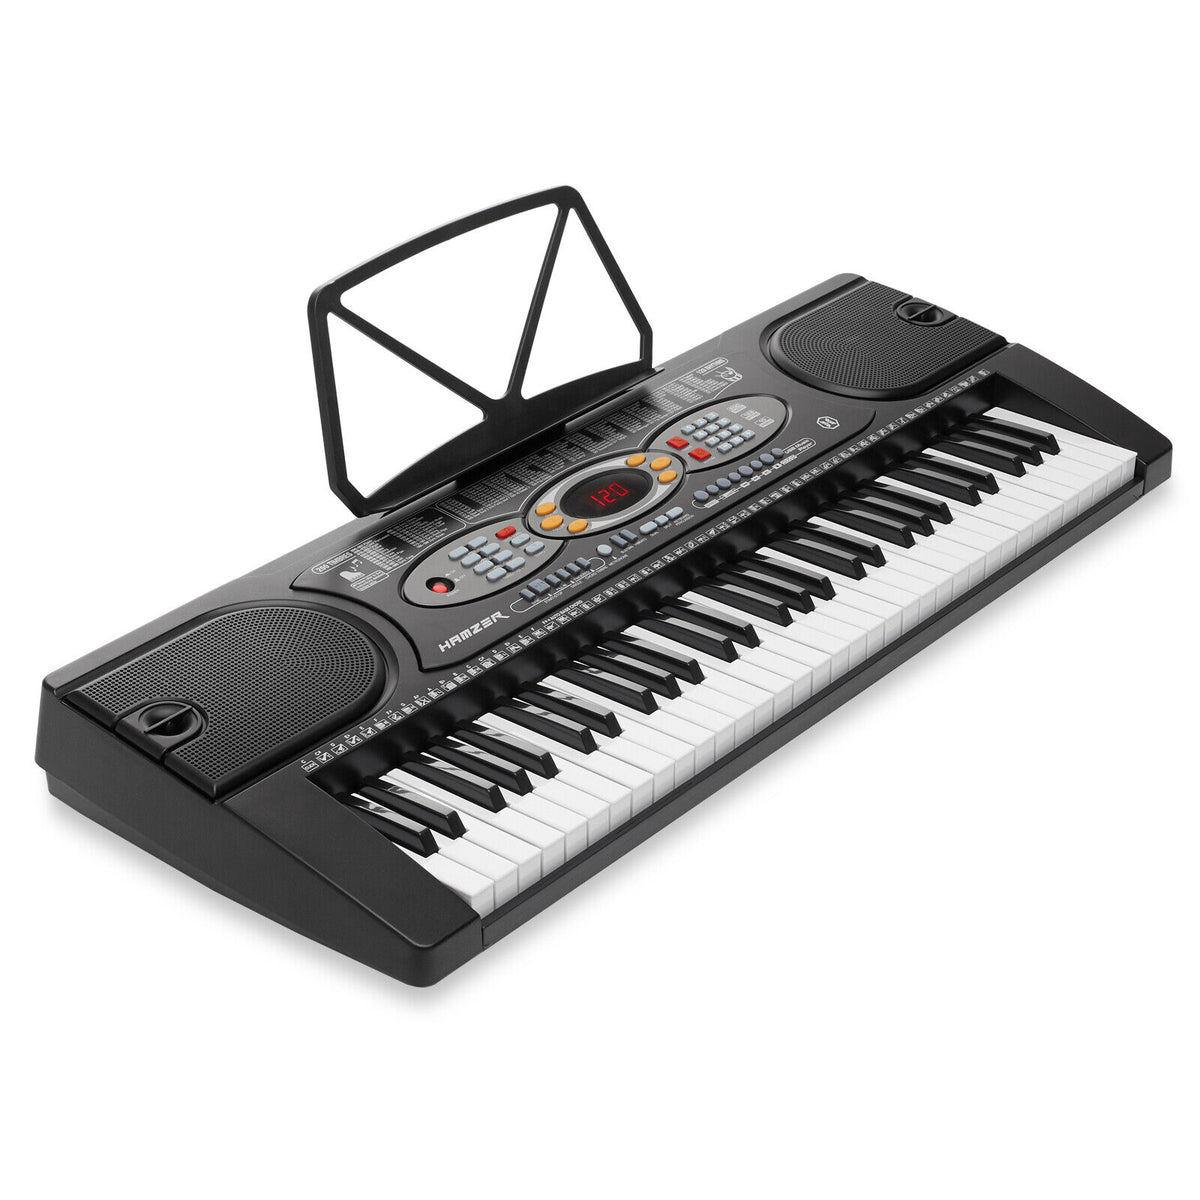 Portable Electronic Keyboard 61 Keys with Microphone USB and Stand Kit